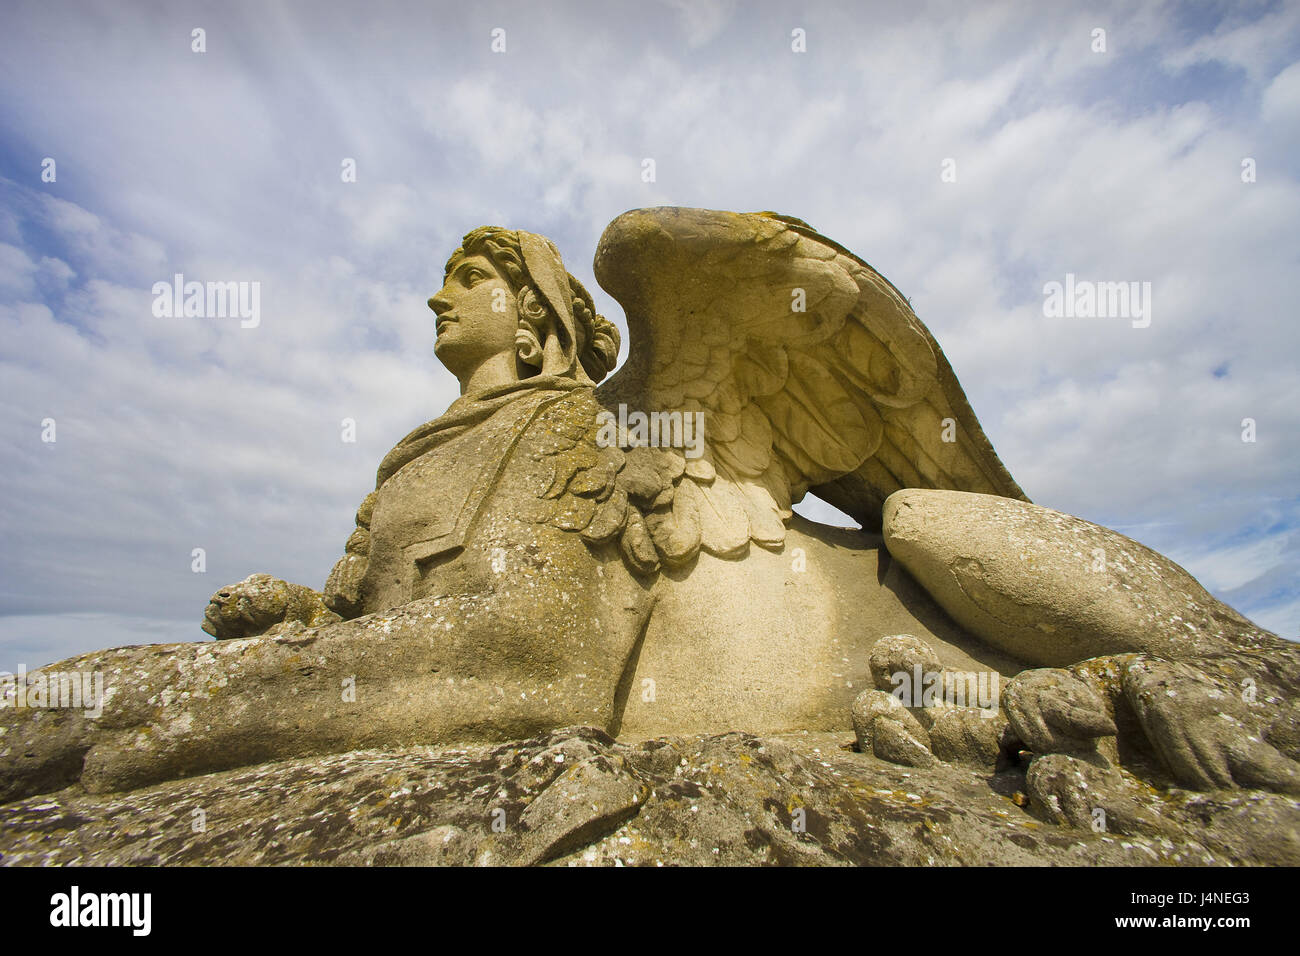 Statue, mythical creature, women's head, wing, lion's body, Stock Photo